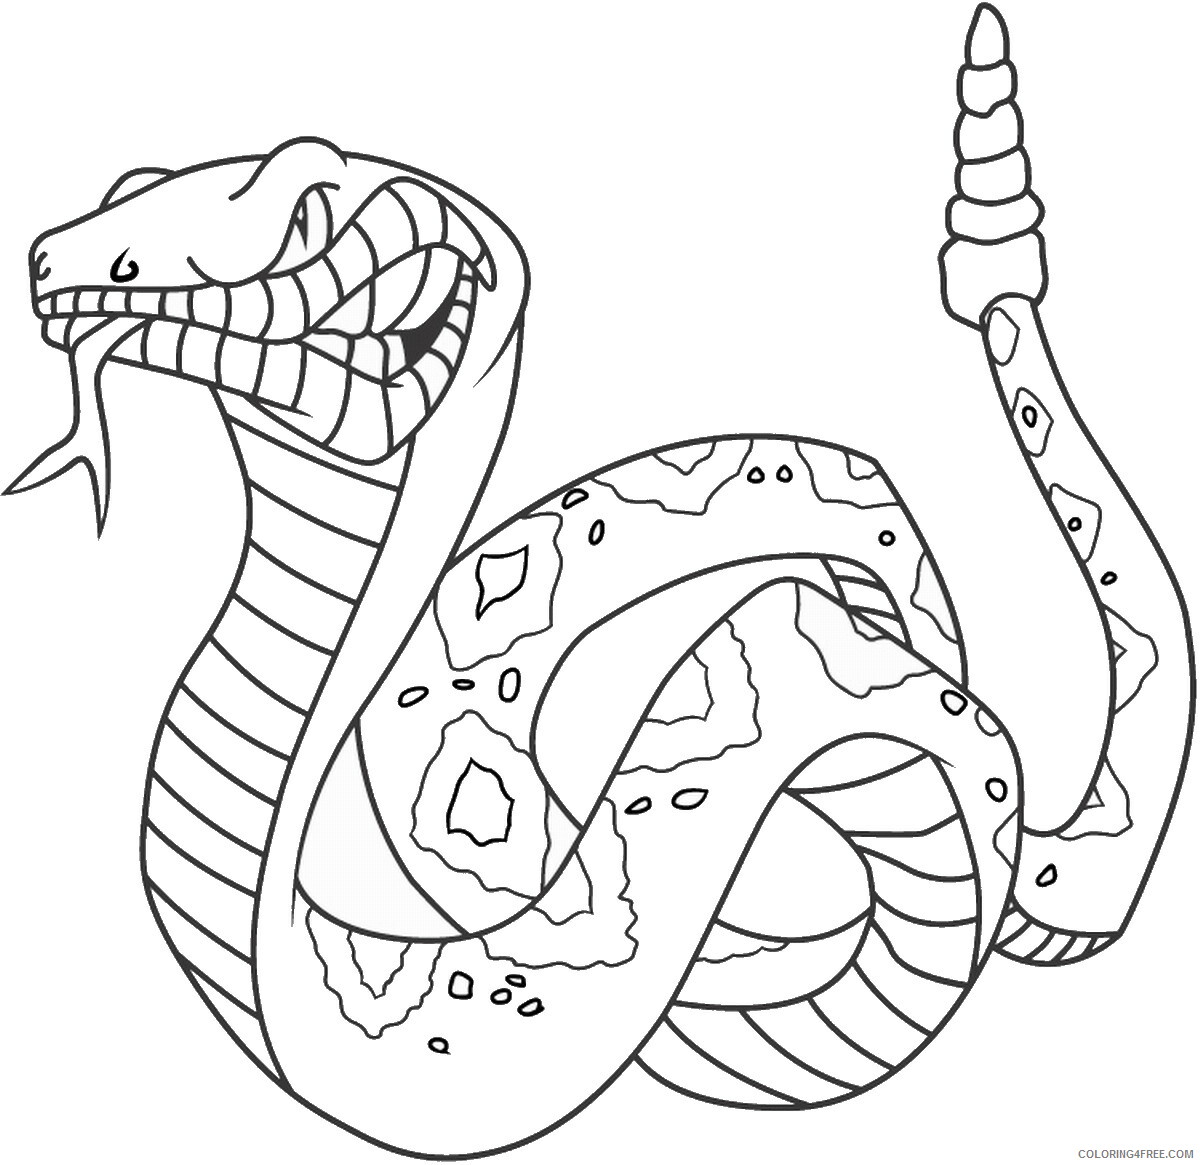 Snake Coloring Pages Animal Printable Sheets snake_cl_02 2021 4554 Coloring4free